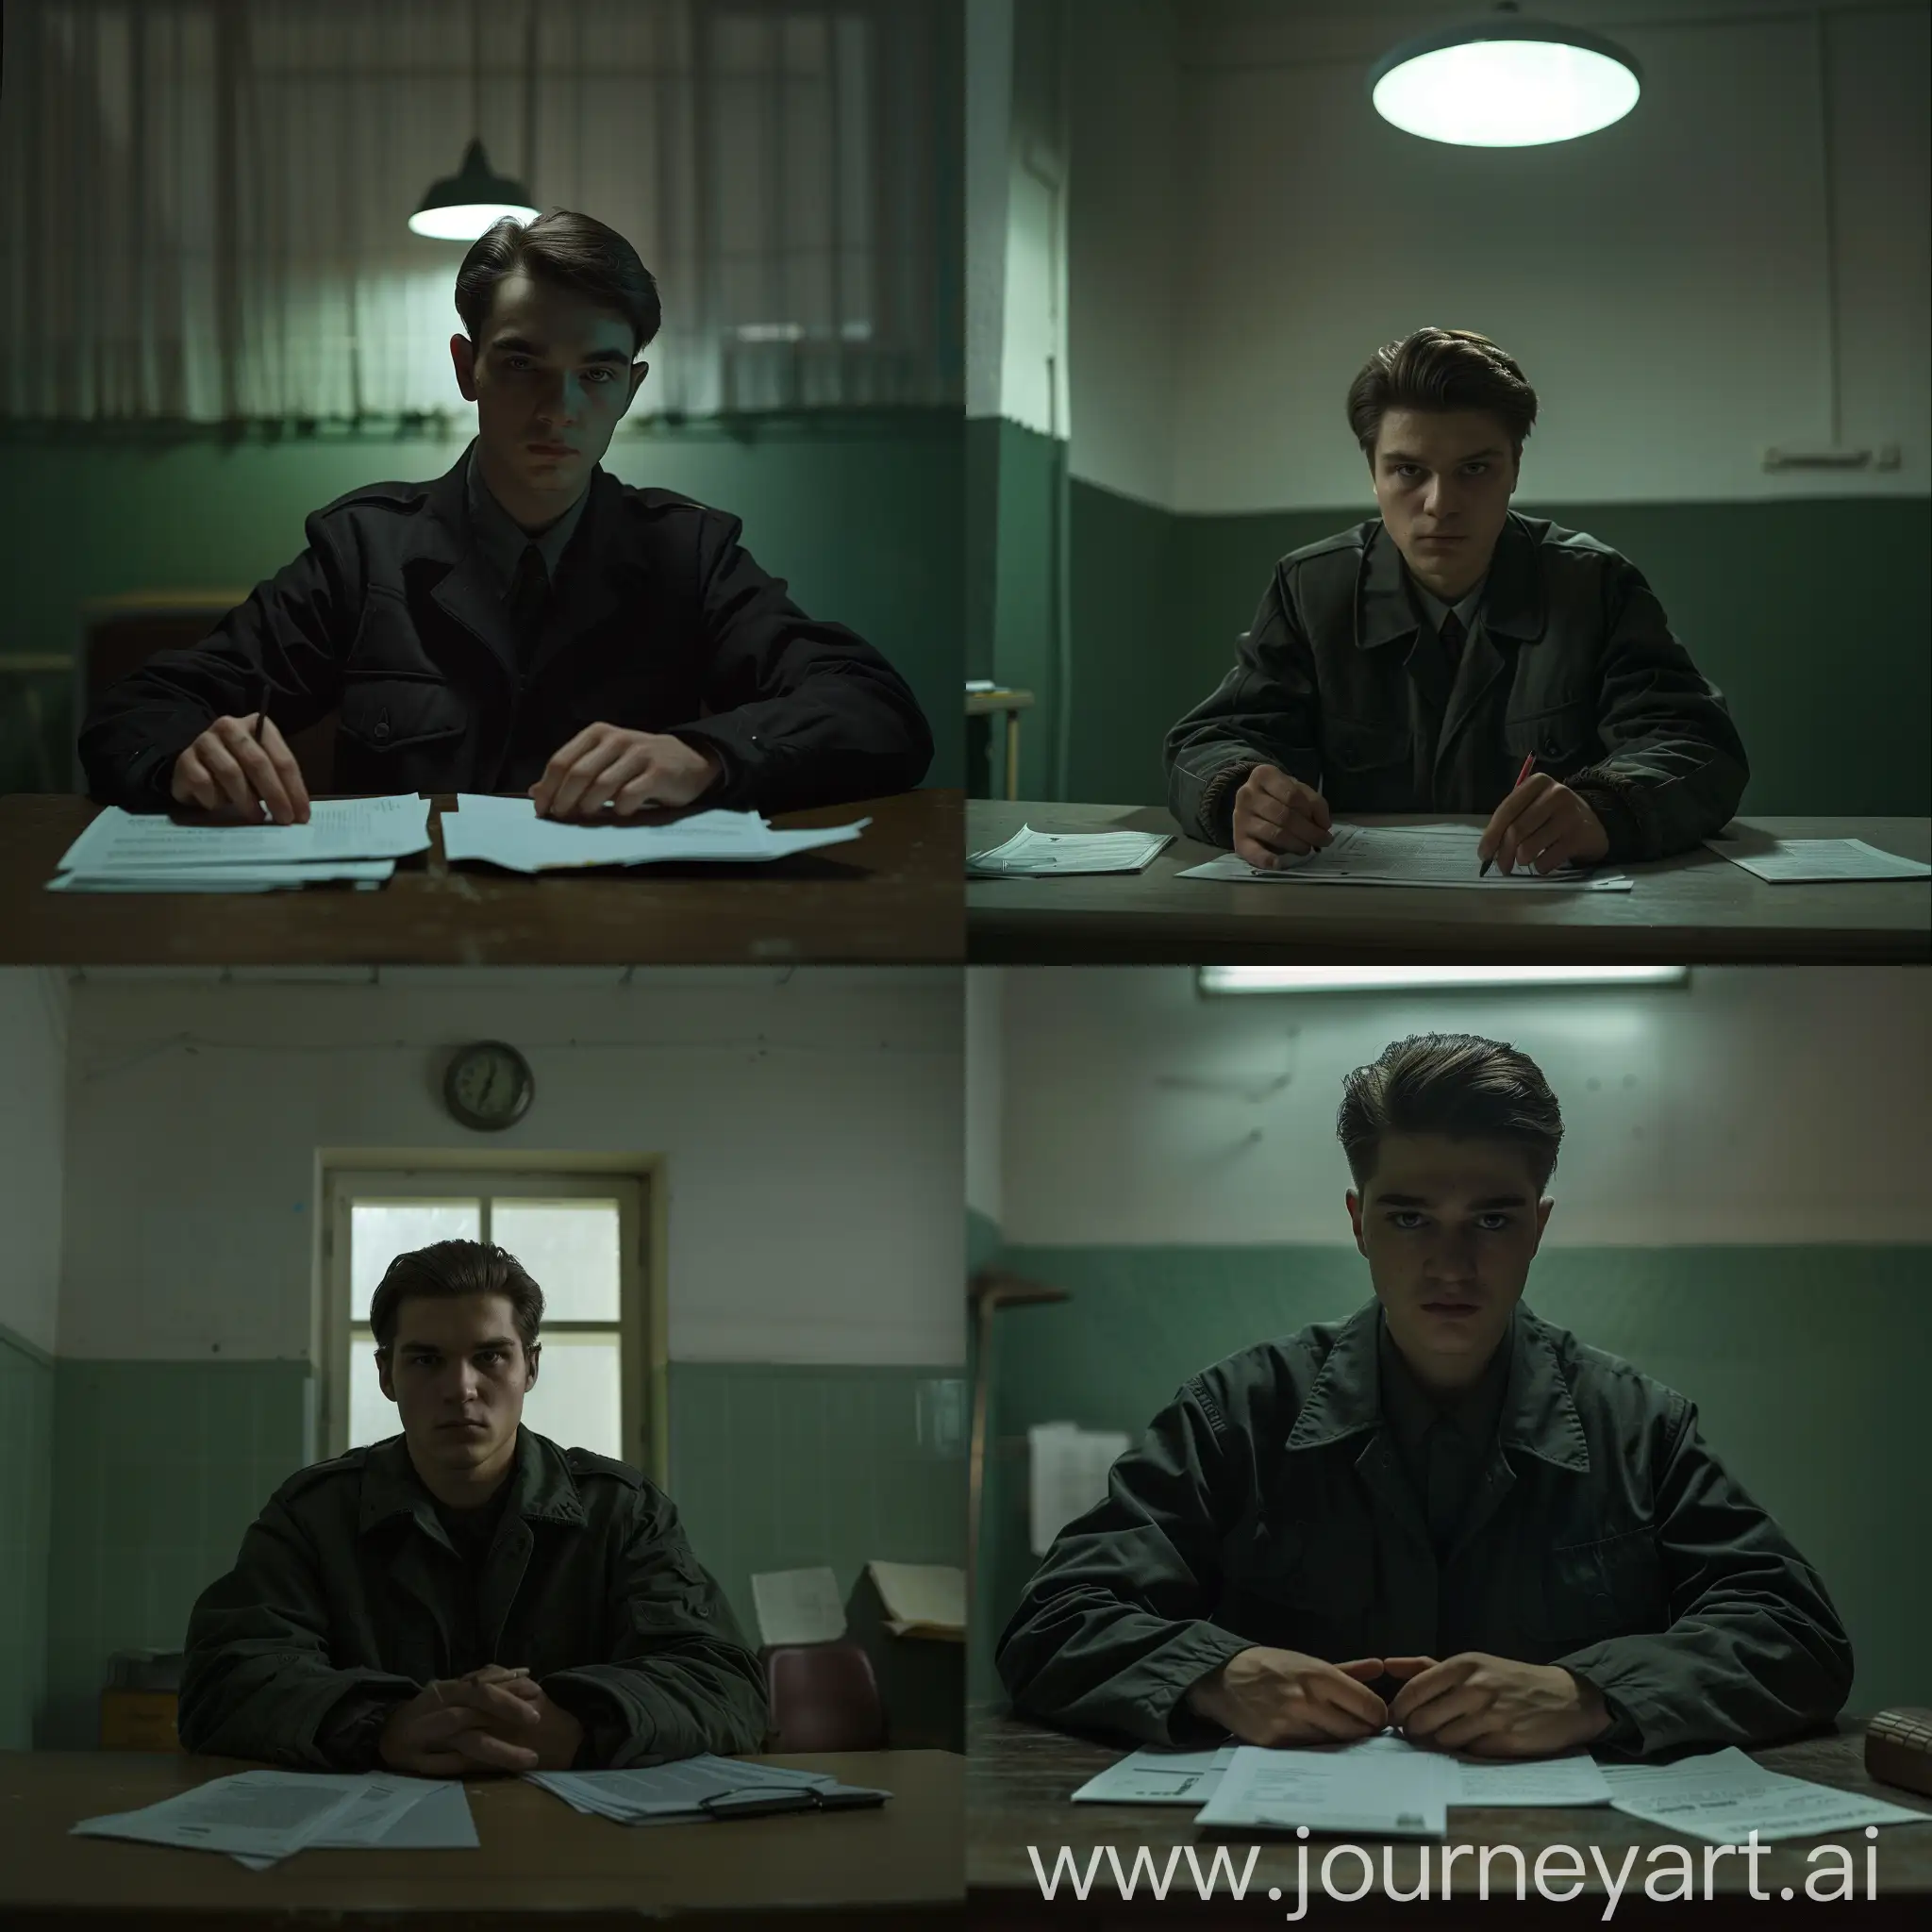 Soviet office, dim lighting, in the office the walls are painted green from below, in white from above, in the office at the table sits a man, young face, serious look, dark brown hair combed back, dark Soviet jacket, papers on the table, hands on the table, hyper-realism, 8K image quality, ultra detail 